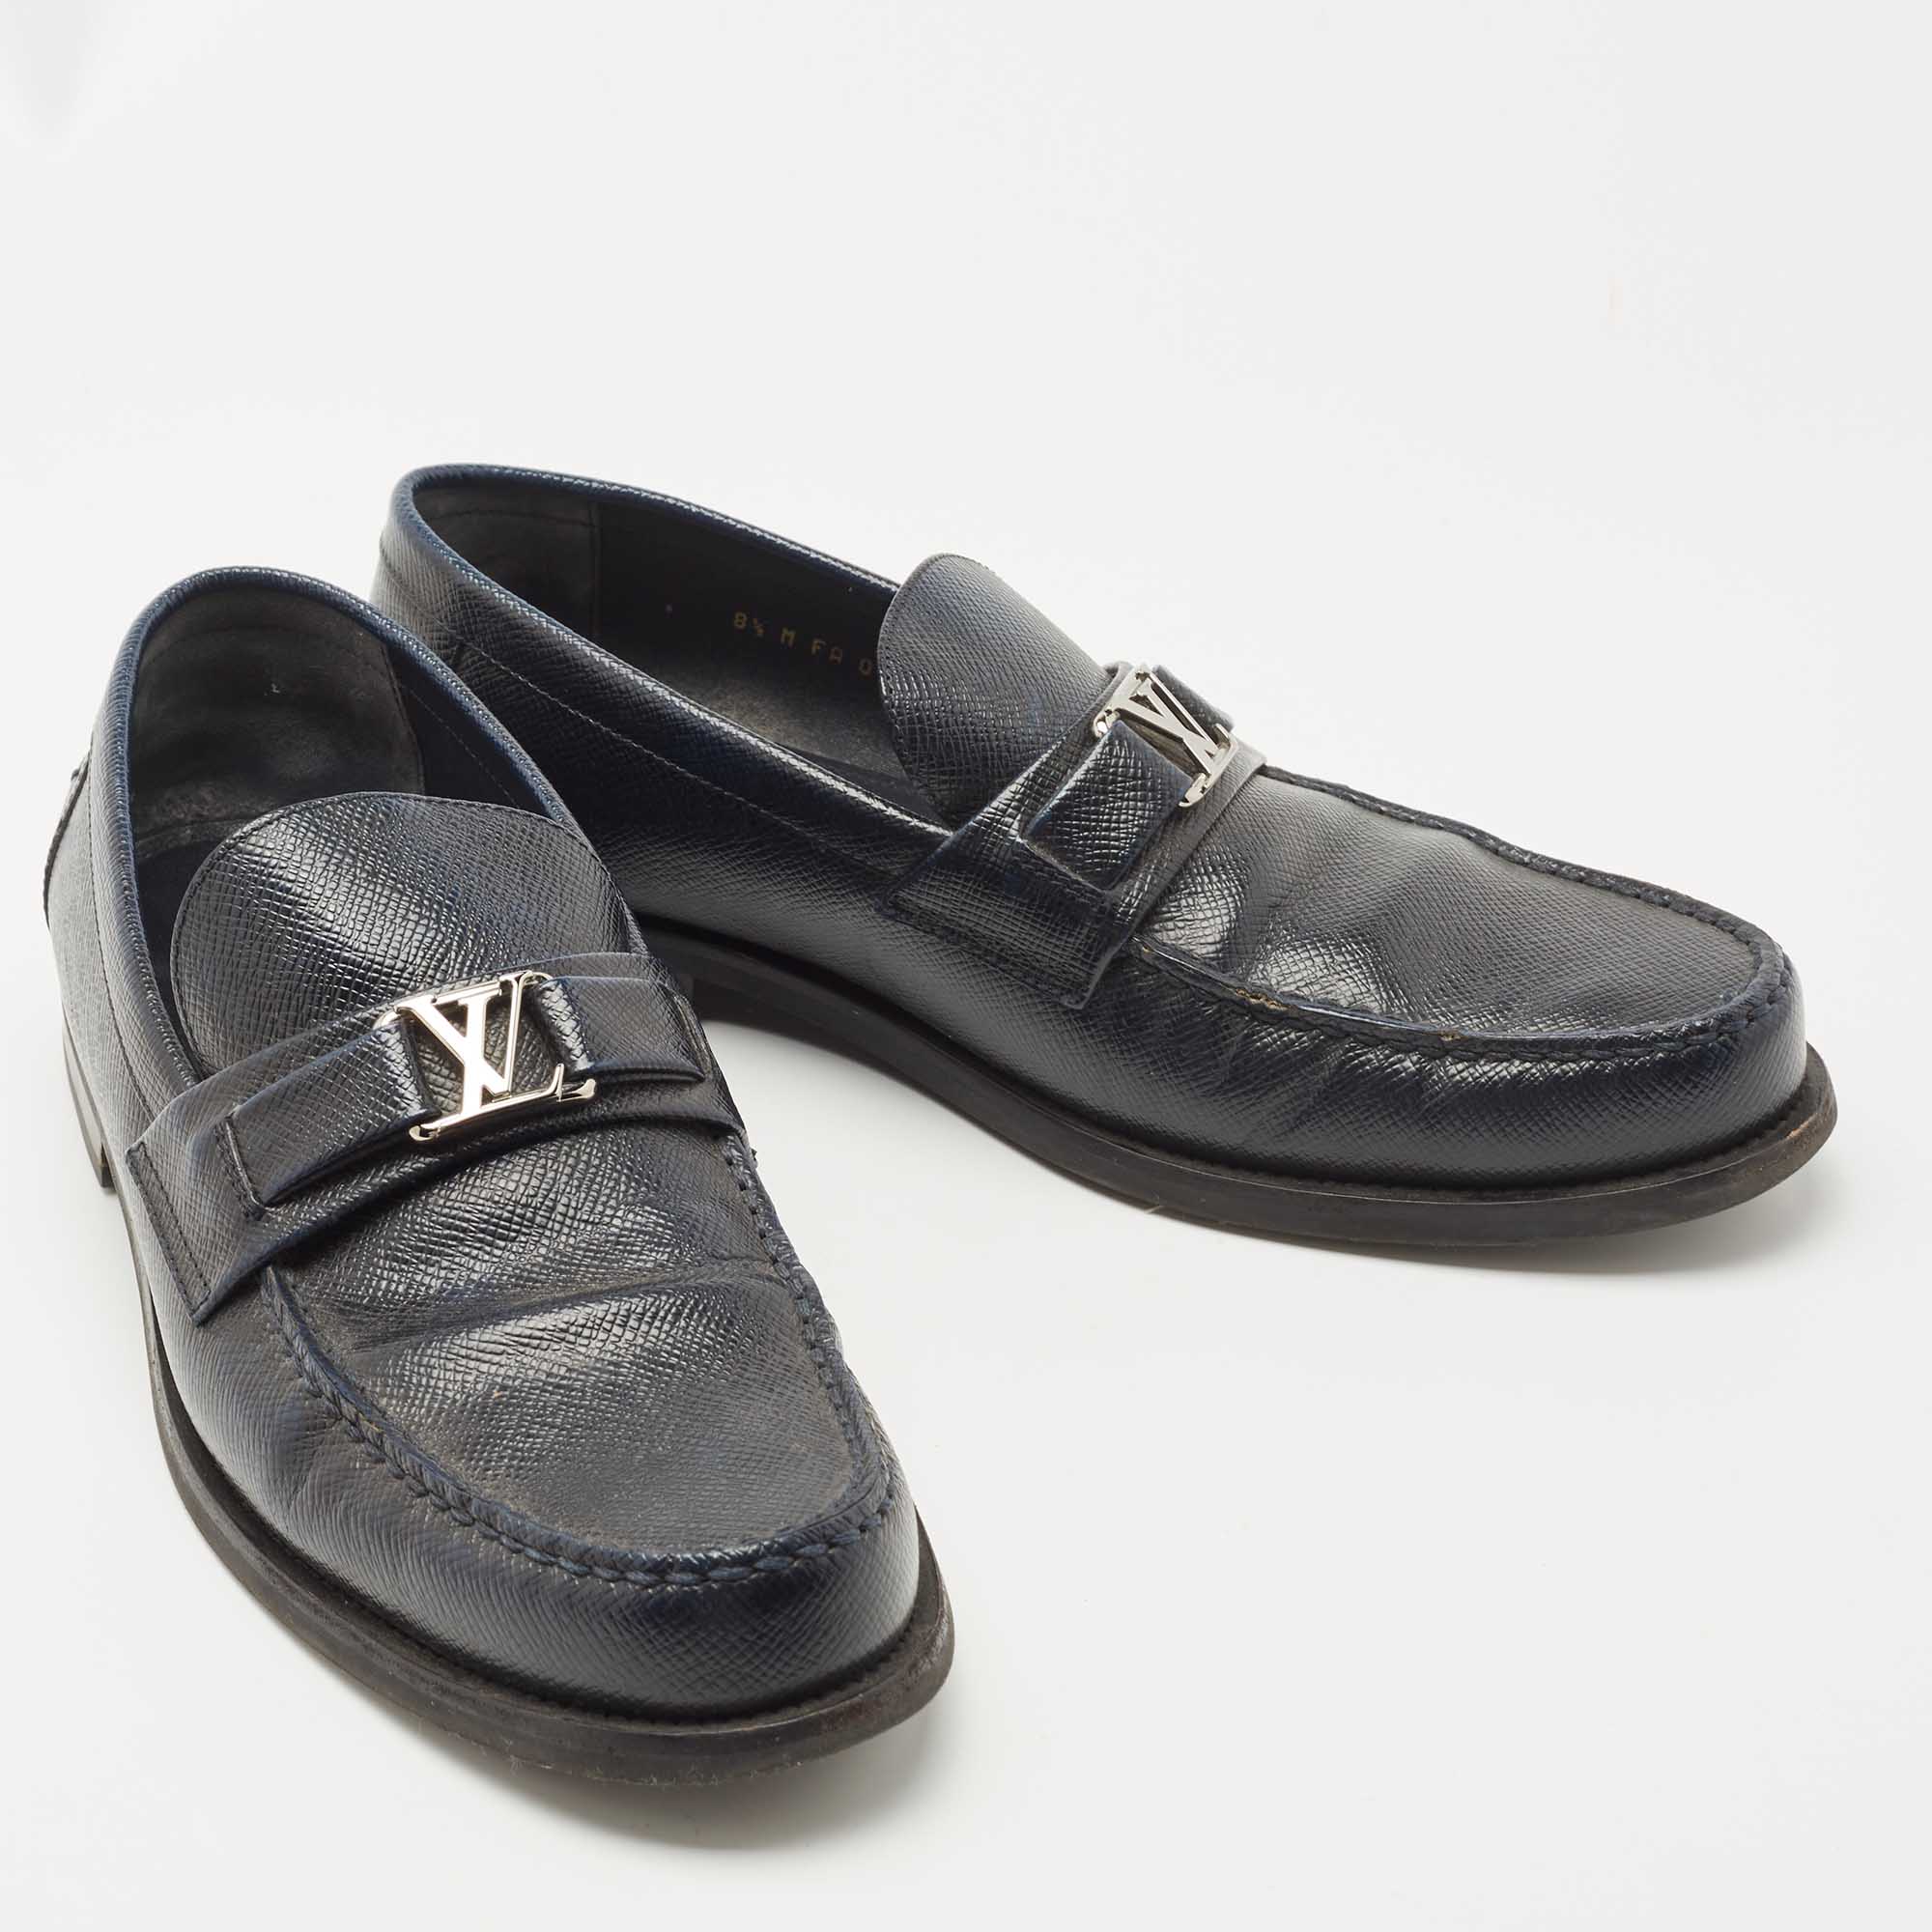 Louis Vuitton Navy Blue Leather Major Loafers Size 42.5